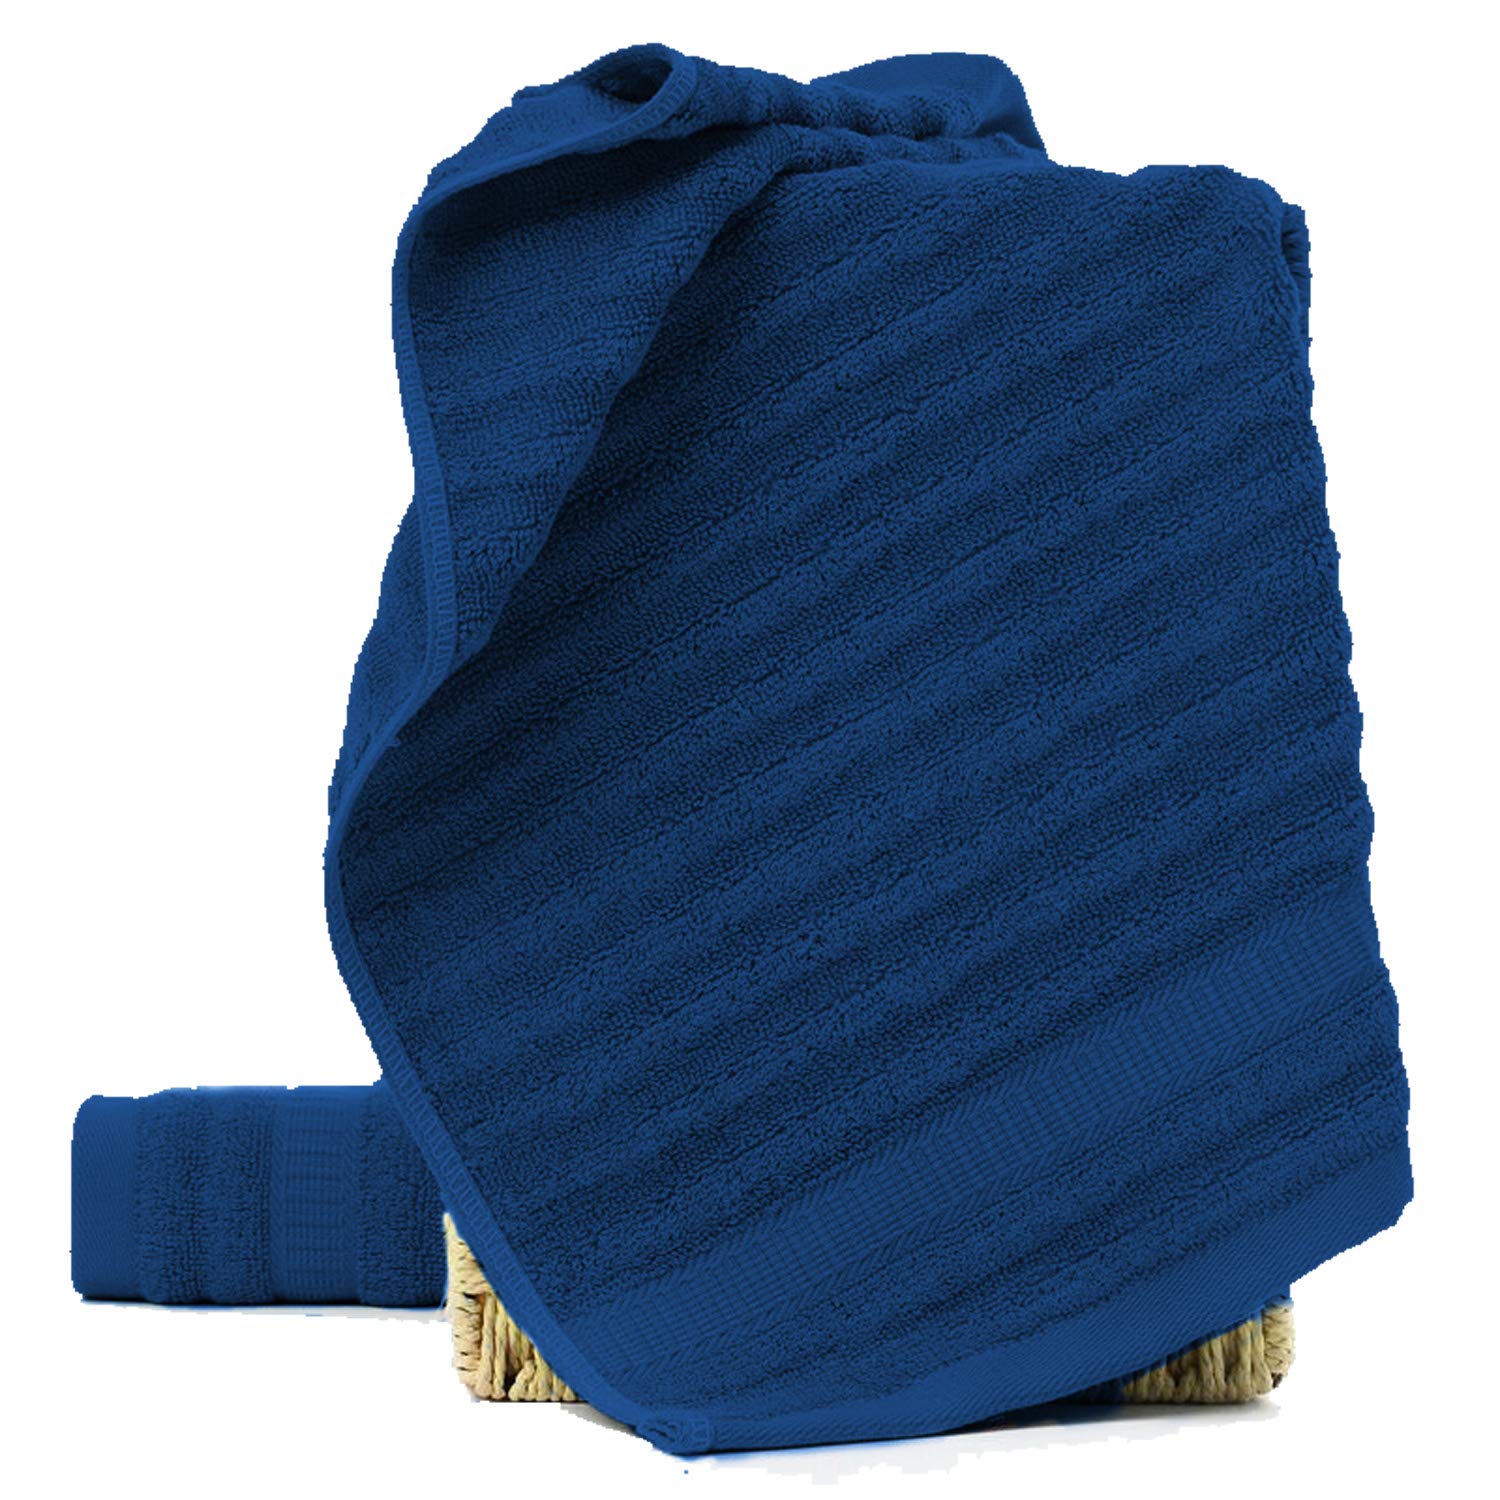 Mush Bamboo Hand Towel Set of 2 | 100% Bamboo | Ultra Soft, Absorbent & Quick Dry Towel for Daily use. Gym, Pool, Travel, Sports and Yoga | 75 X 35 cms | 600 GSM (Navy Blue)